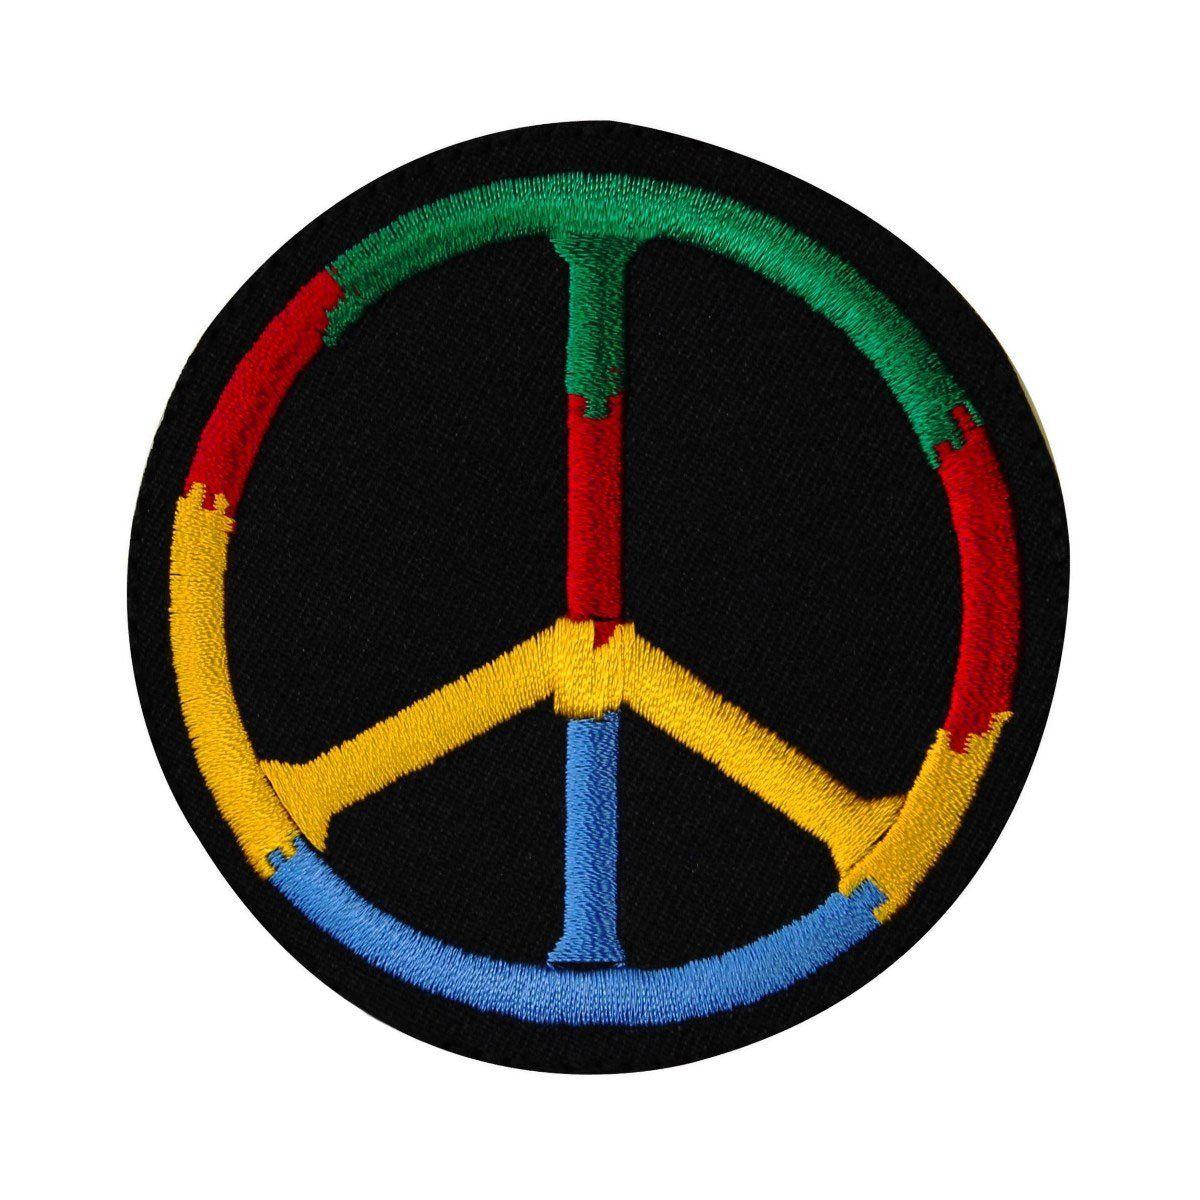 Hippie Peace Sign Logo - Amazon.com : Hippie Peace Symbol Sign Logo Embroidered Iron On Patch ...